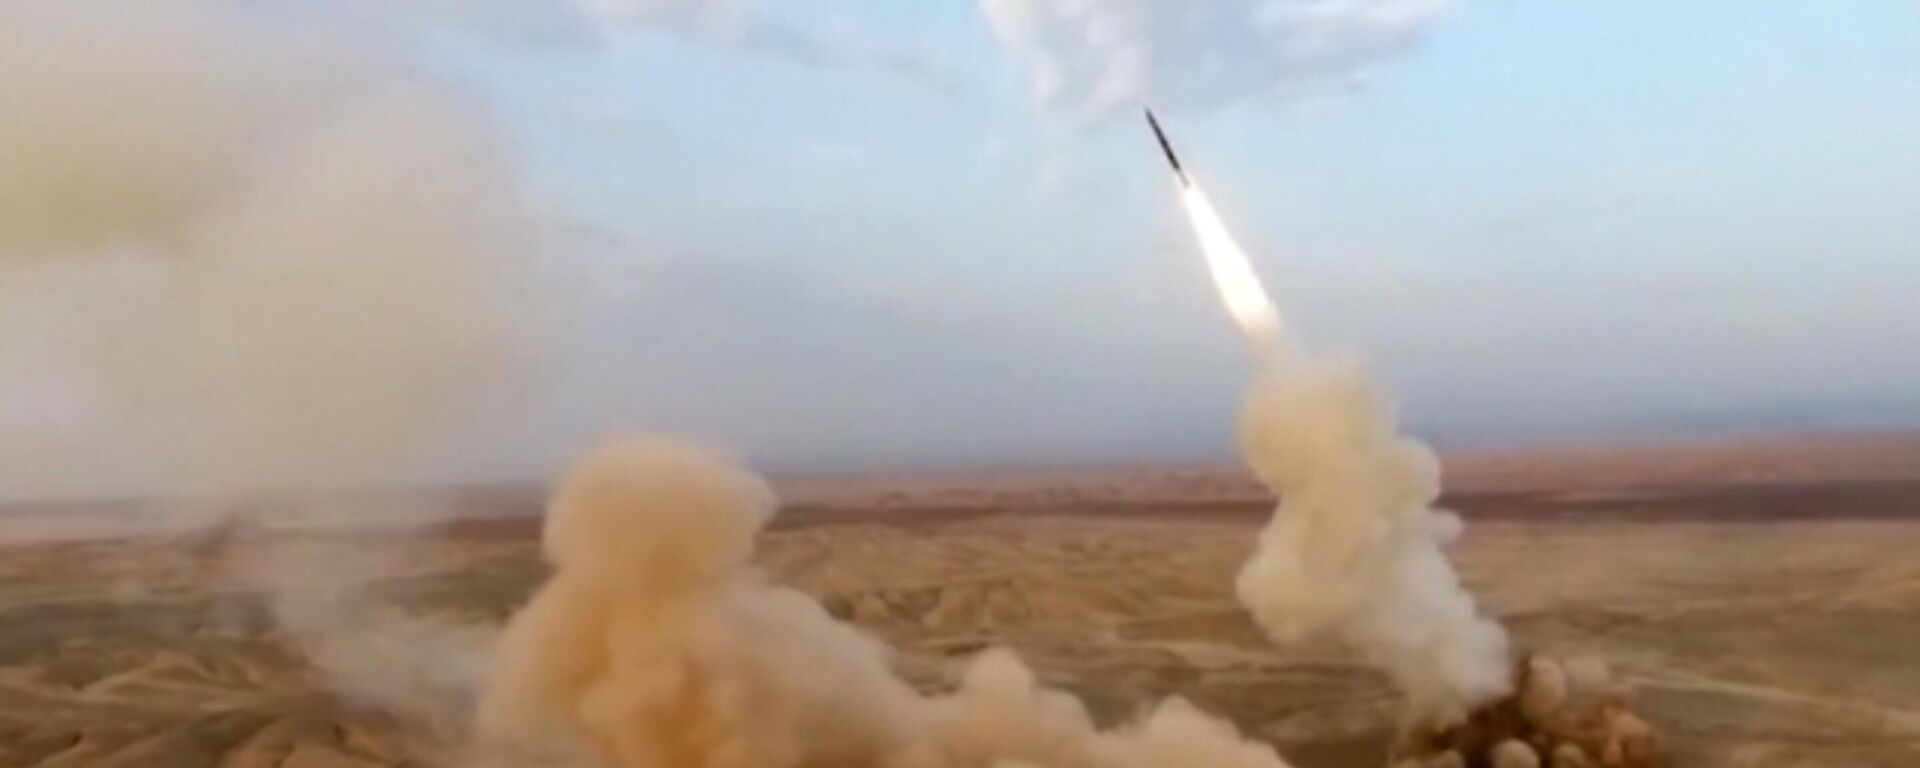 This frame grab from video shows the launching of underground ballistic missiles by the Iranian Revolutionary Guard during a military exercise, July 29, 2020. Iran's paramilitary guard launched underground ballistic missiles as part of an exercise involving a mock-up aircraft carrier in the Strait of Hormuz, state television reported Wednesday - Sputnik International, 1920, 19.01.2024